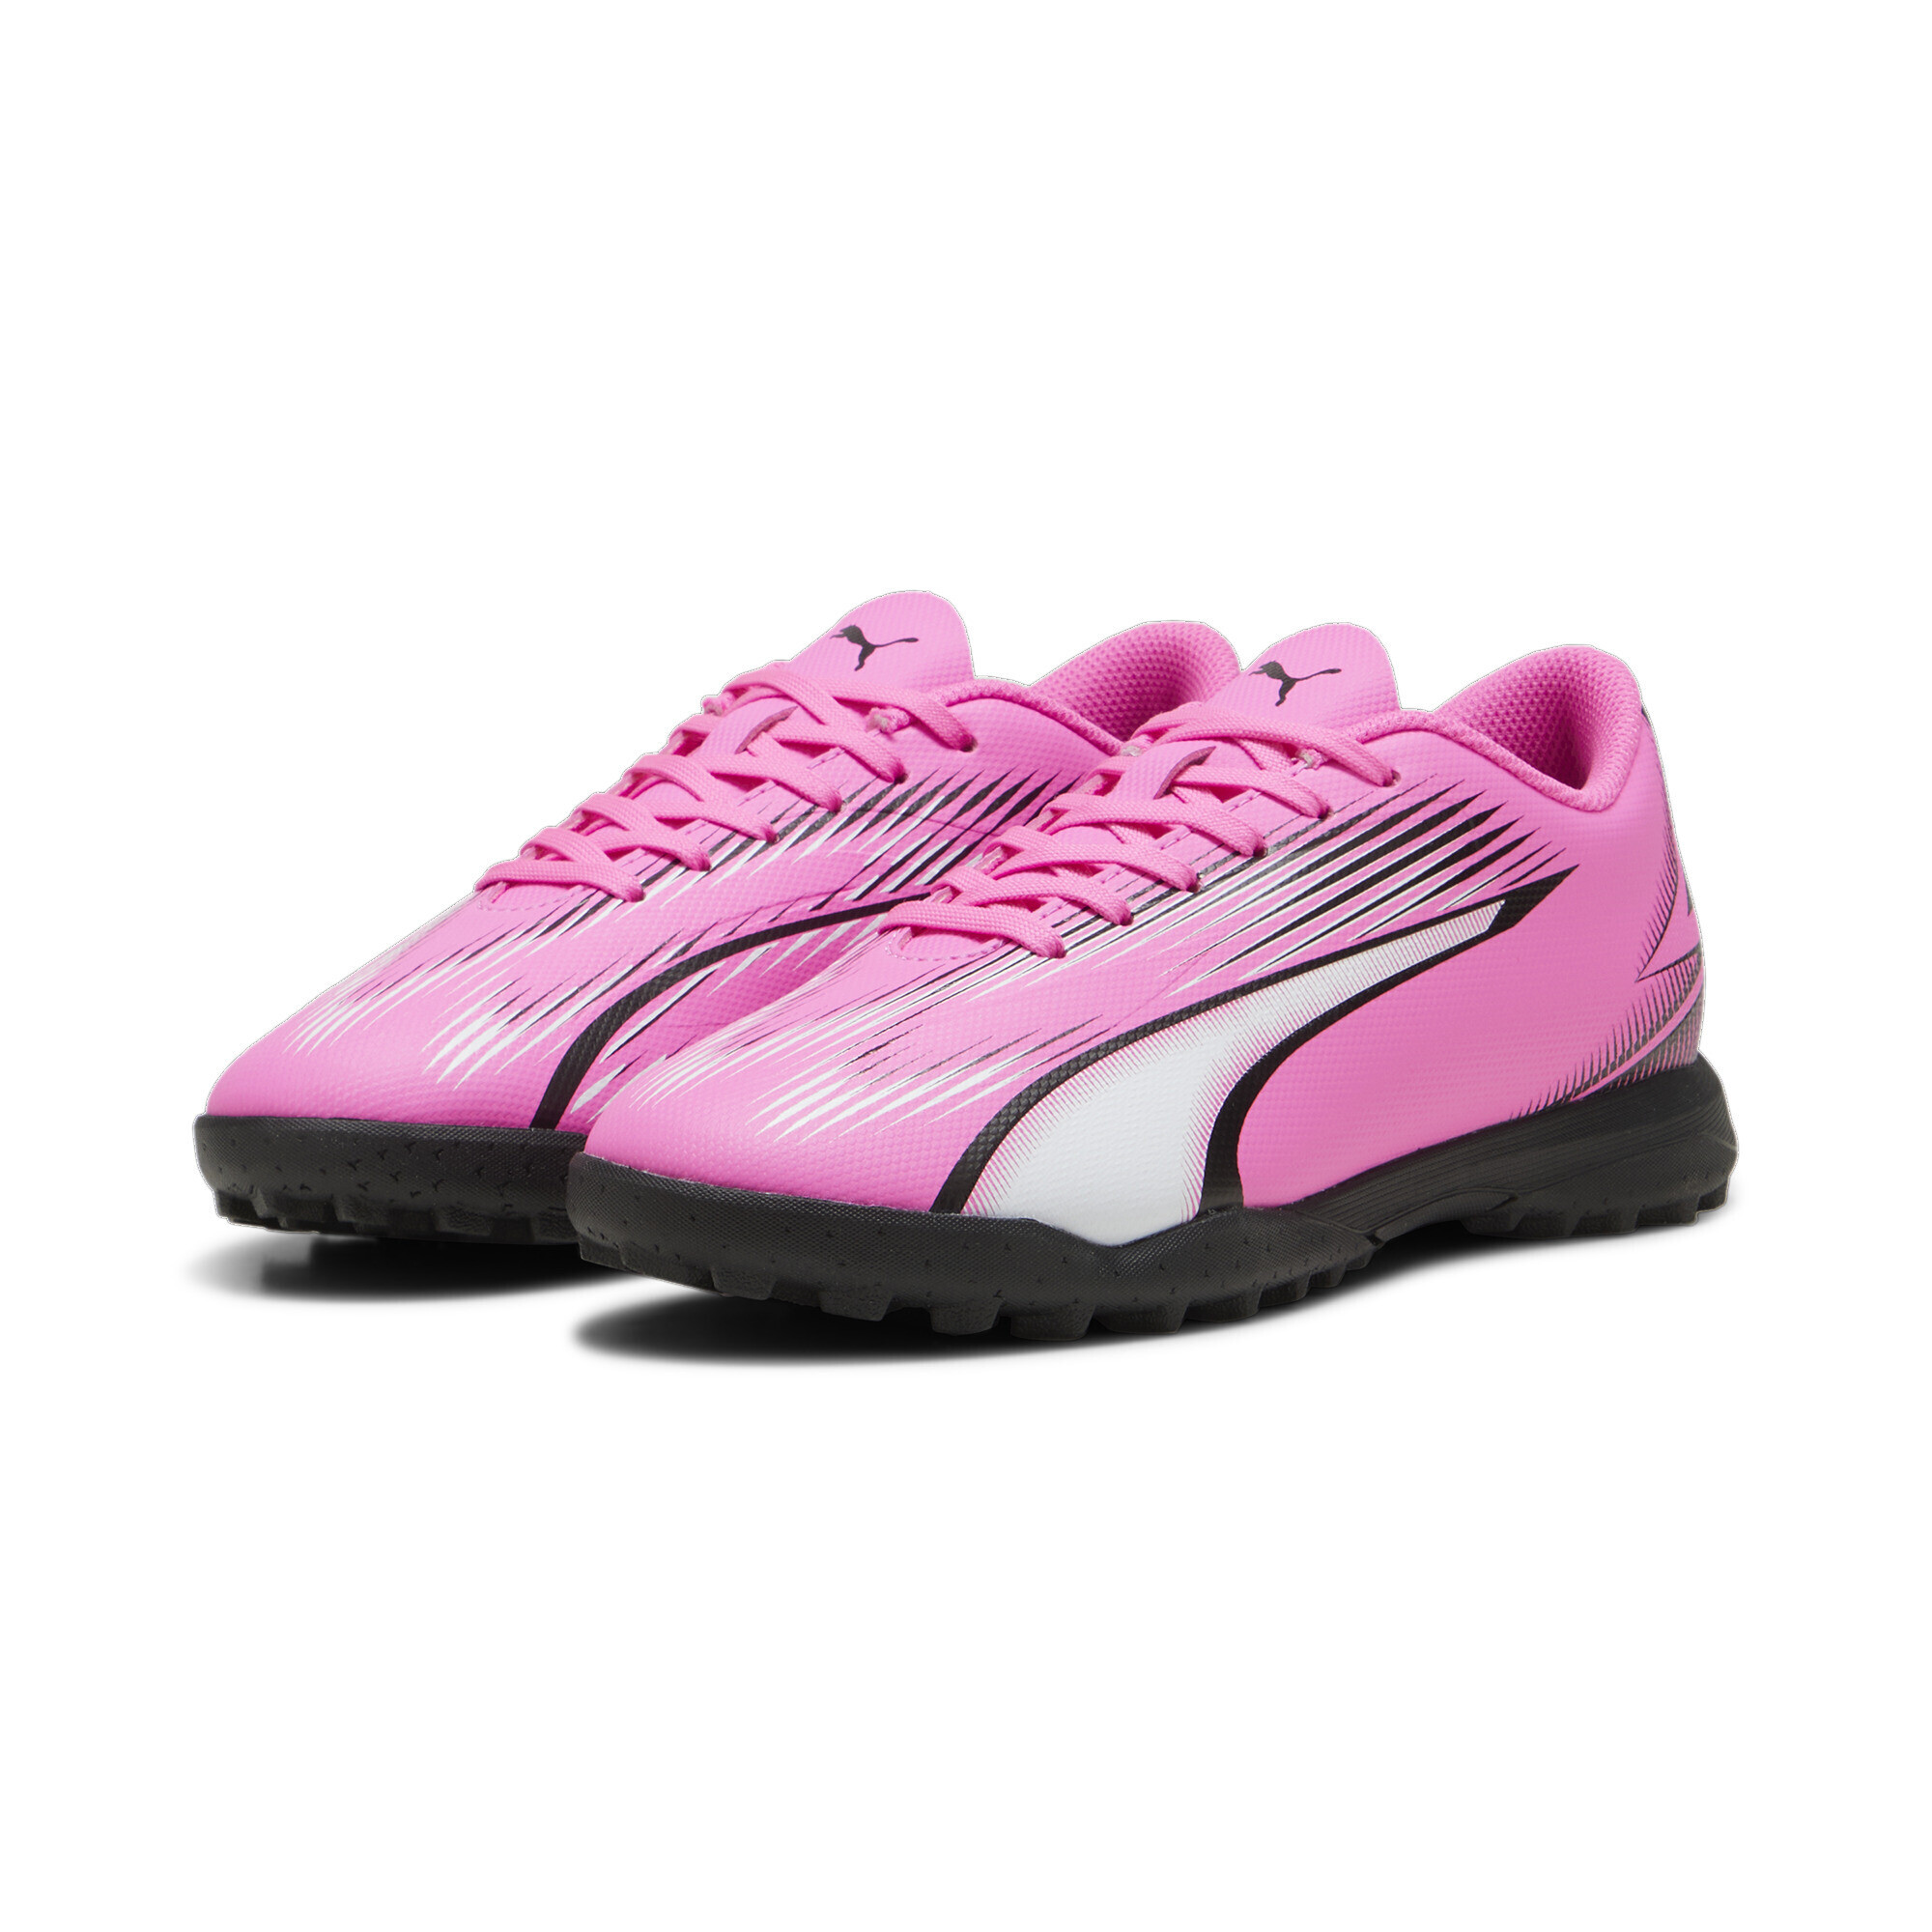 PUMA ULTRA PLAY TT Youth Football Boots In Pink, Size EU 33